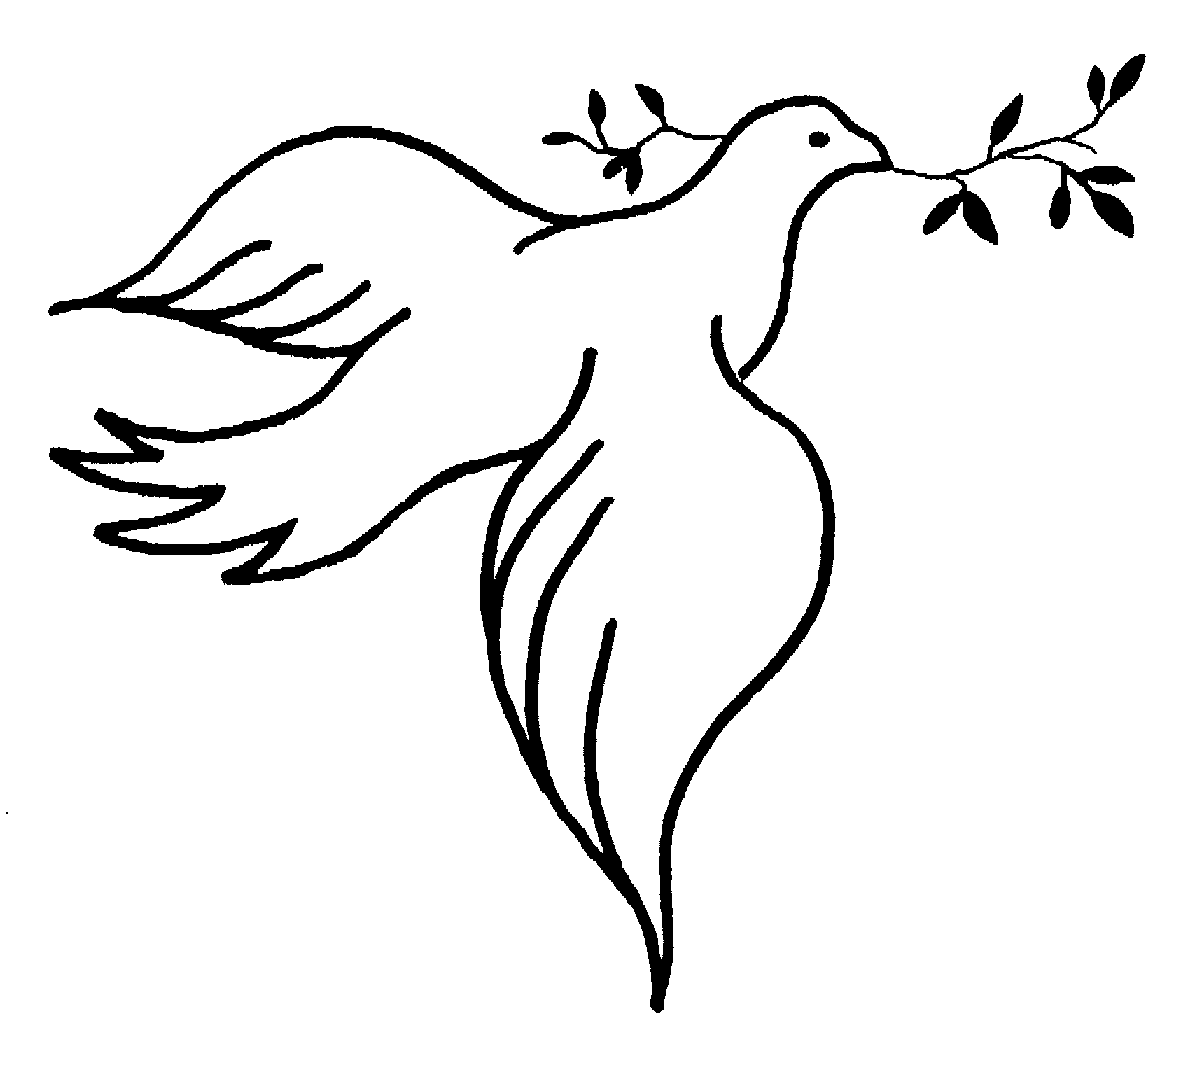 Dove Clipart Black And White | Clipart Panda - Free Clipart Images